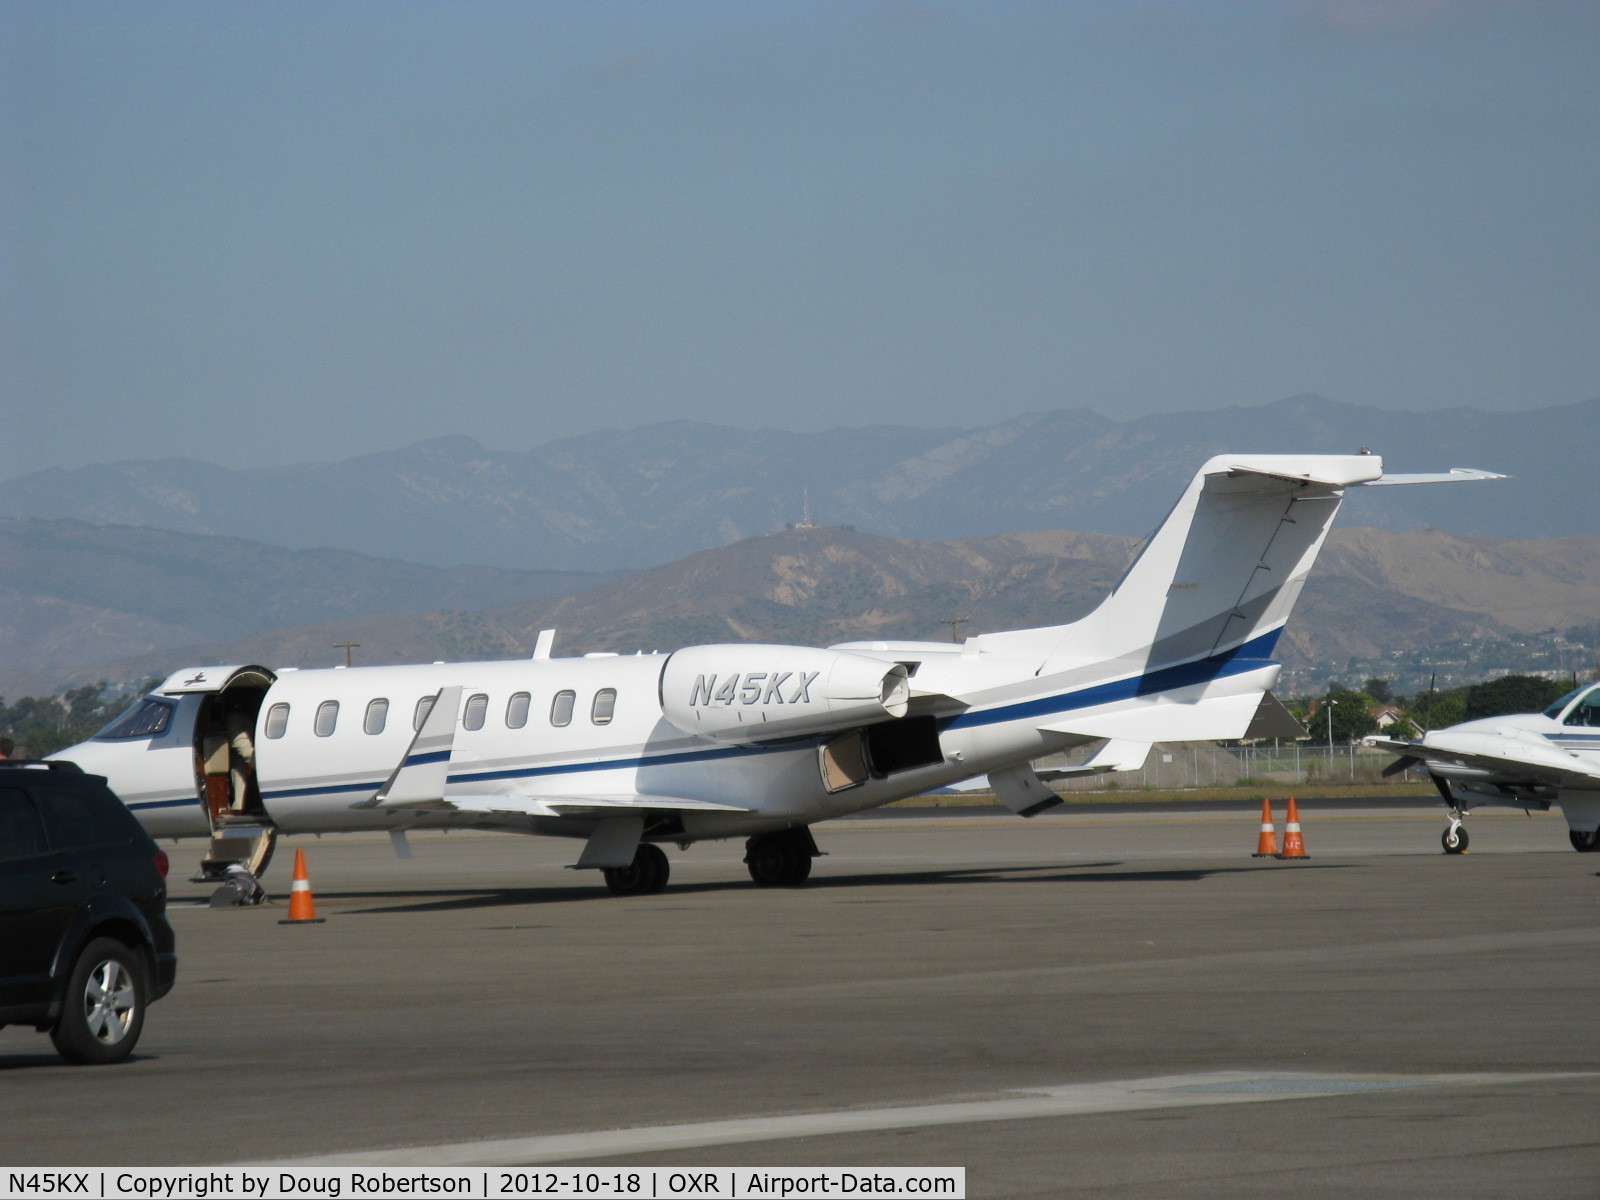 N45KX, Learjet Inc 45 C/N 233, 2004 Learjet 45 Business Jet, two Honeywell TFE731-20 Turbofans flat rated at 3,500 lb st each. Thrust reversers, digital electronic engine controls. On Oxnard Aircraft and Jet Center ramp.